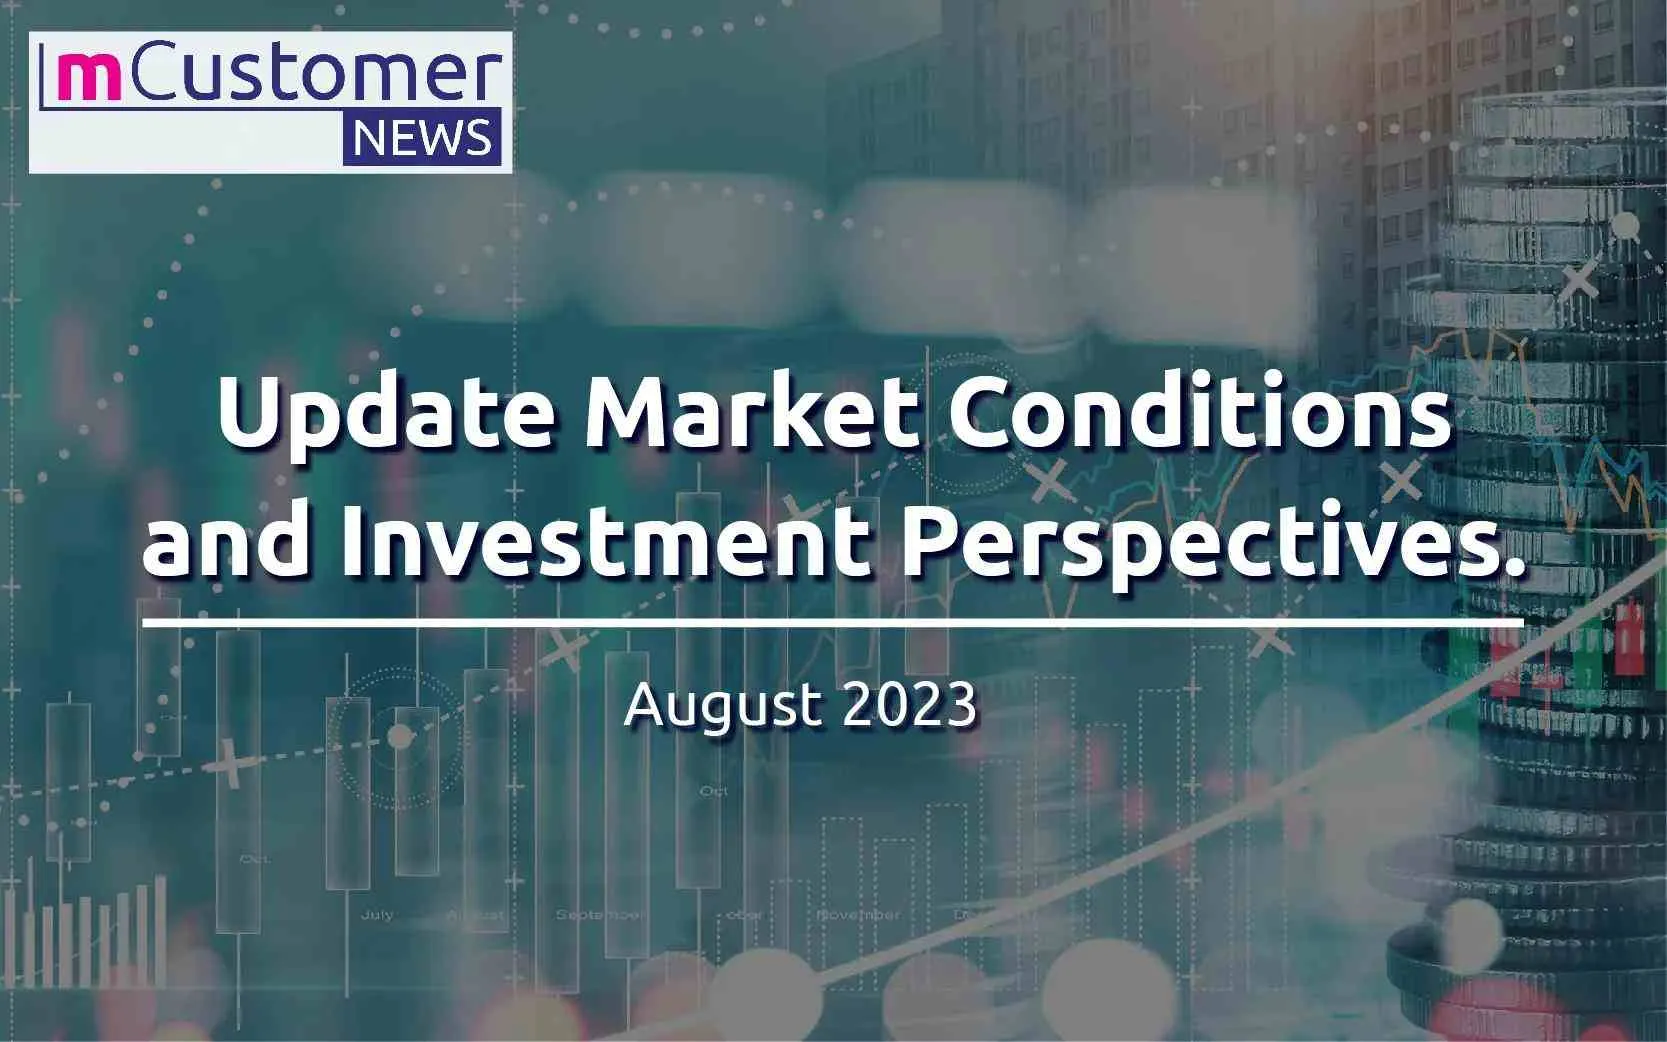 Update Market Conditions and Investment Perspectives as of August 2023